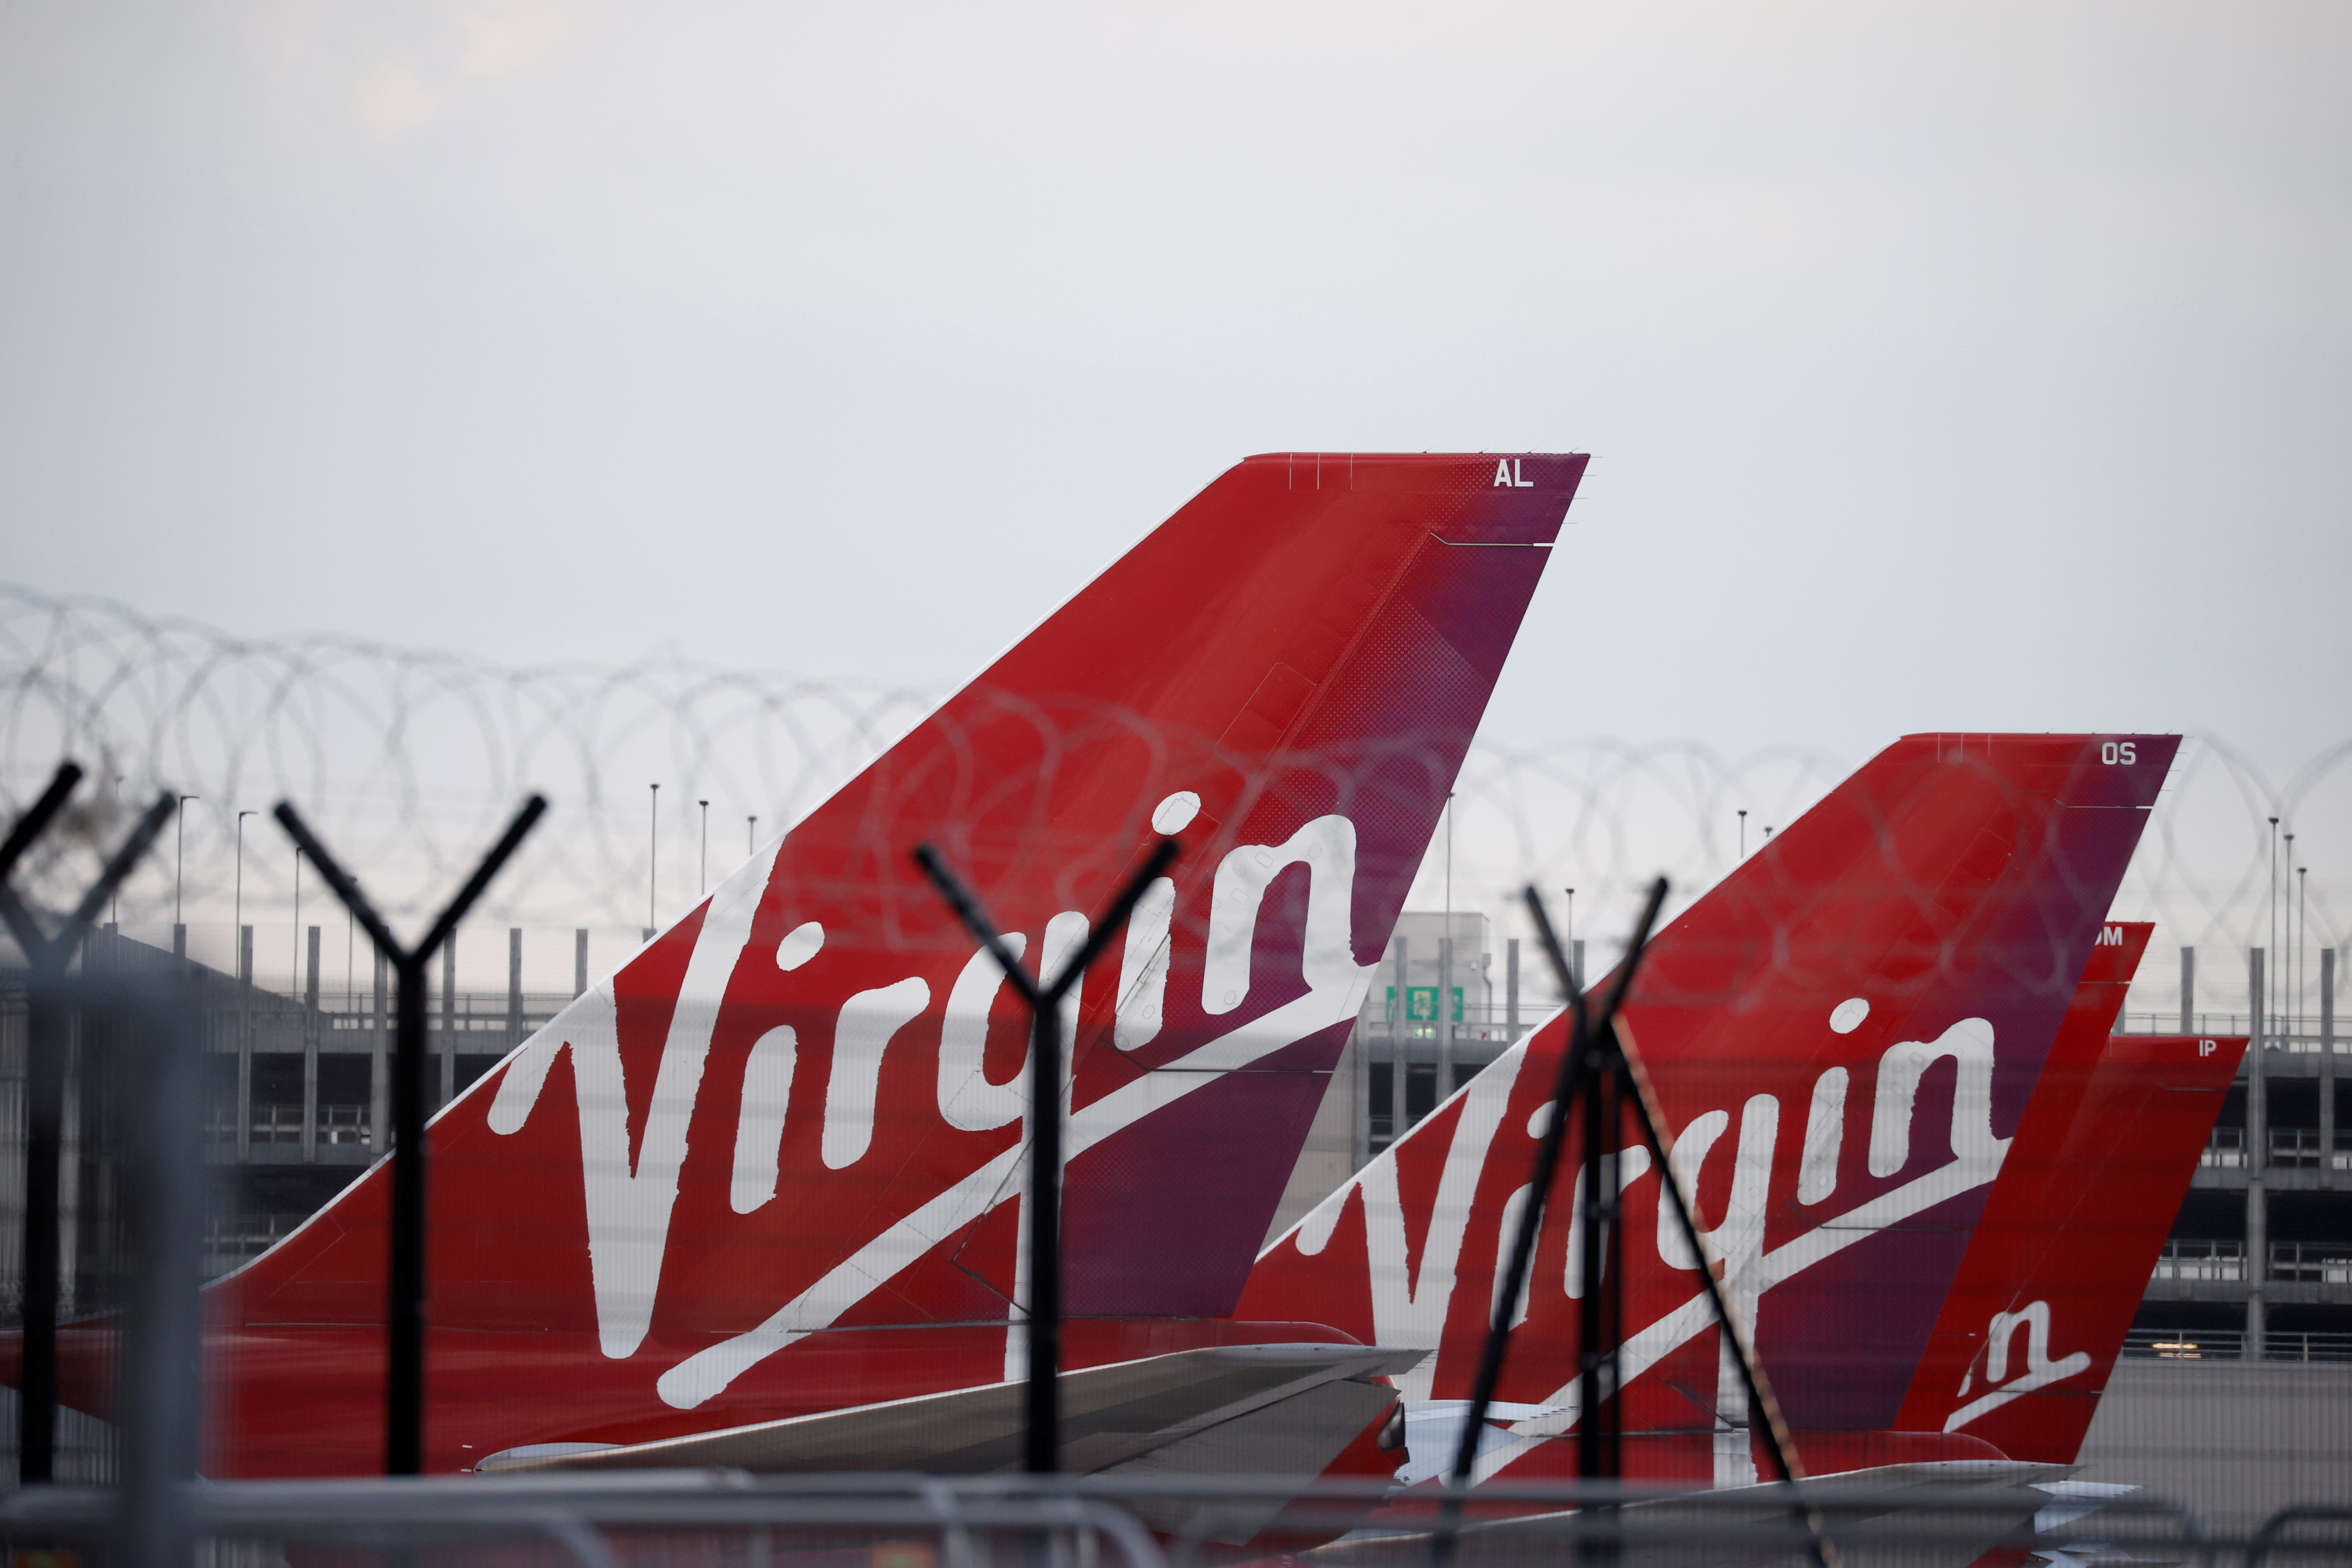 Virgin Atlantic's planes are seen parked at Manchester Airport in Manchester, Britain, May 9, 2020. REUTERS/Phil Noble